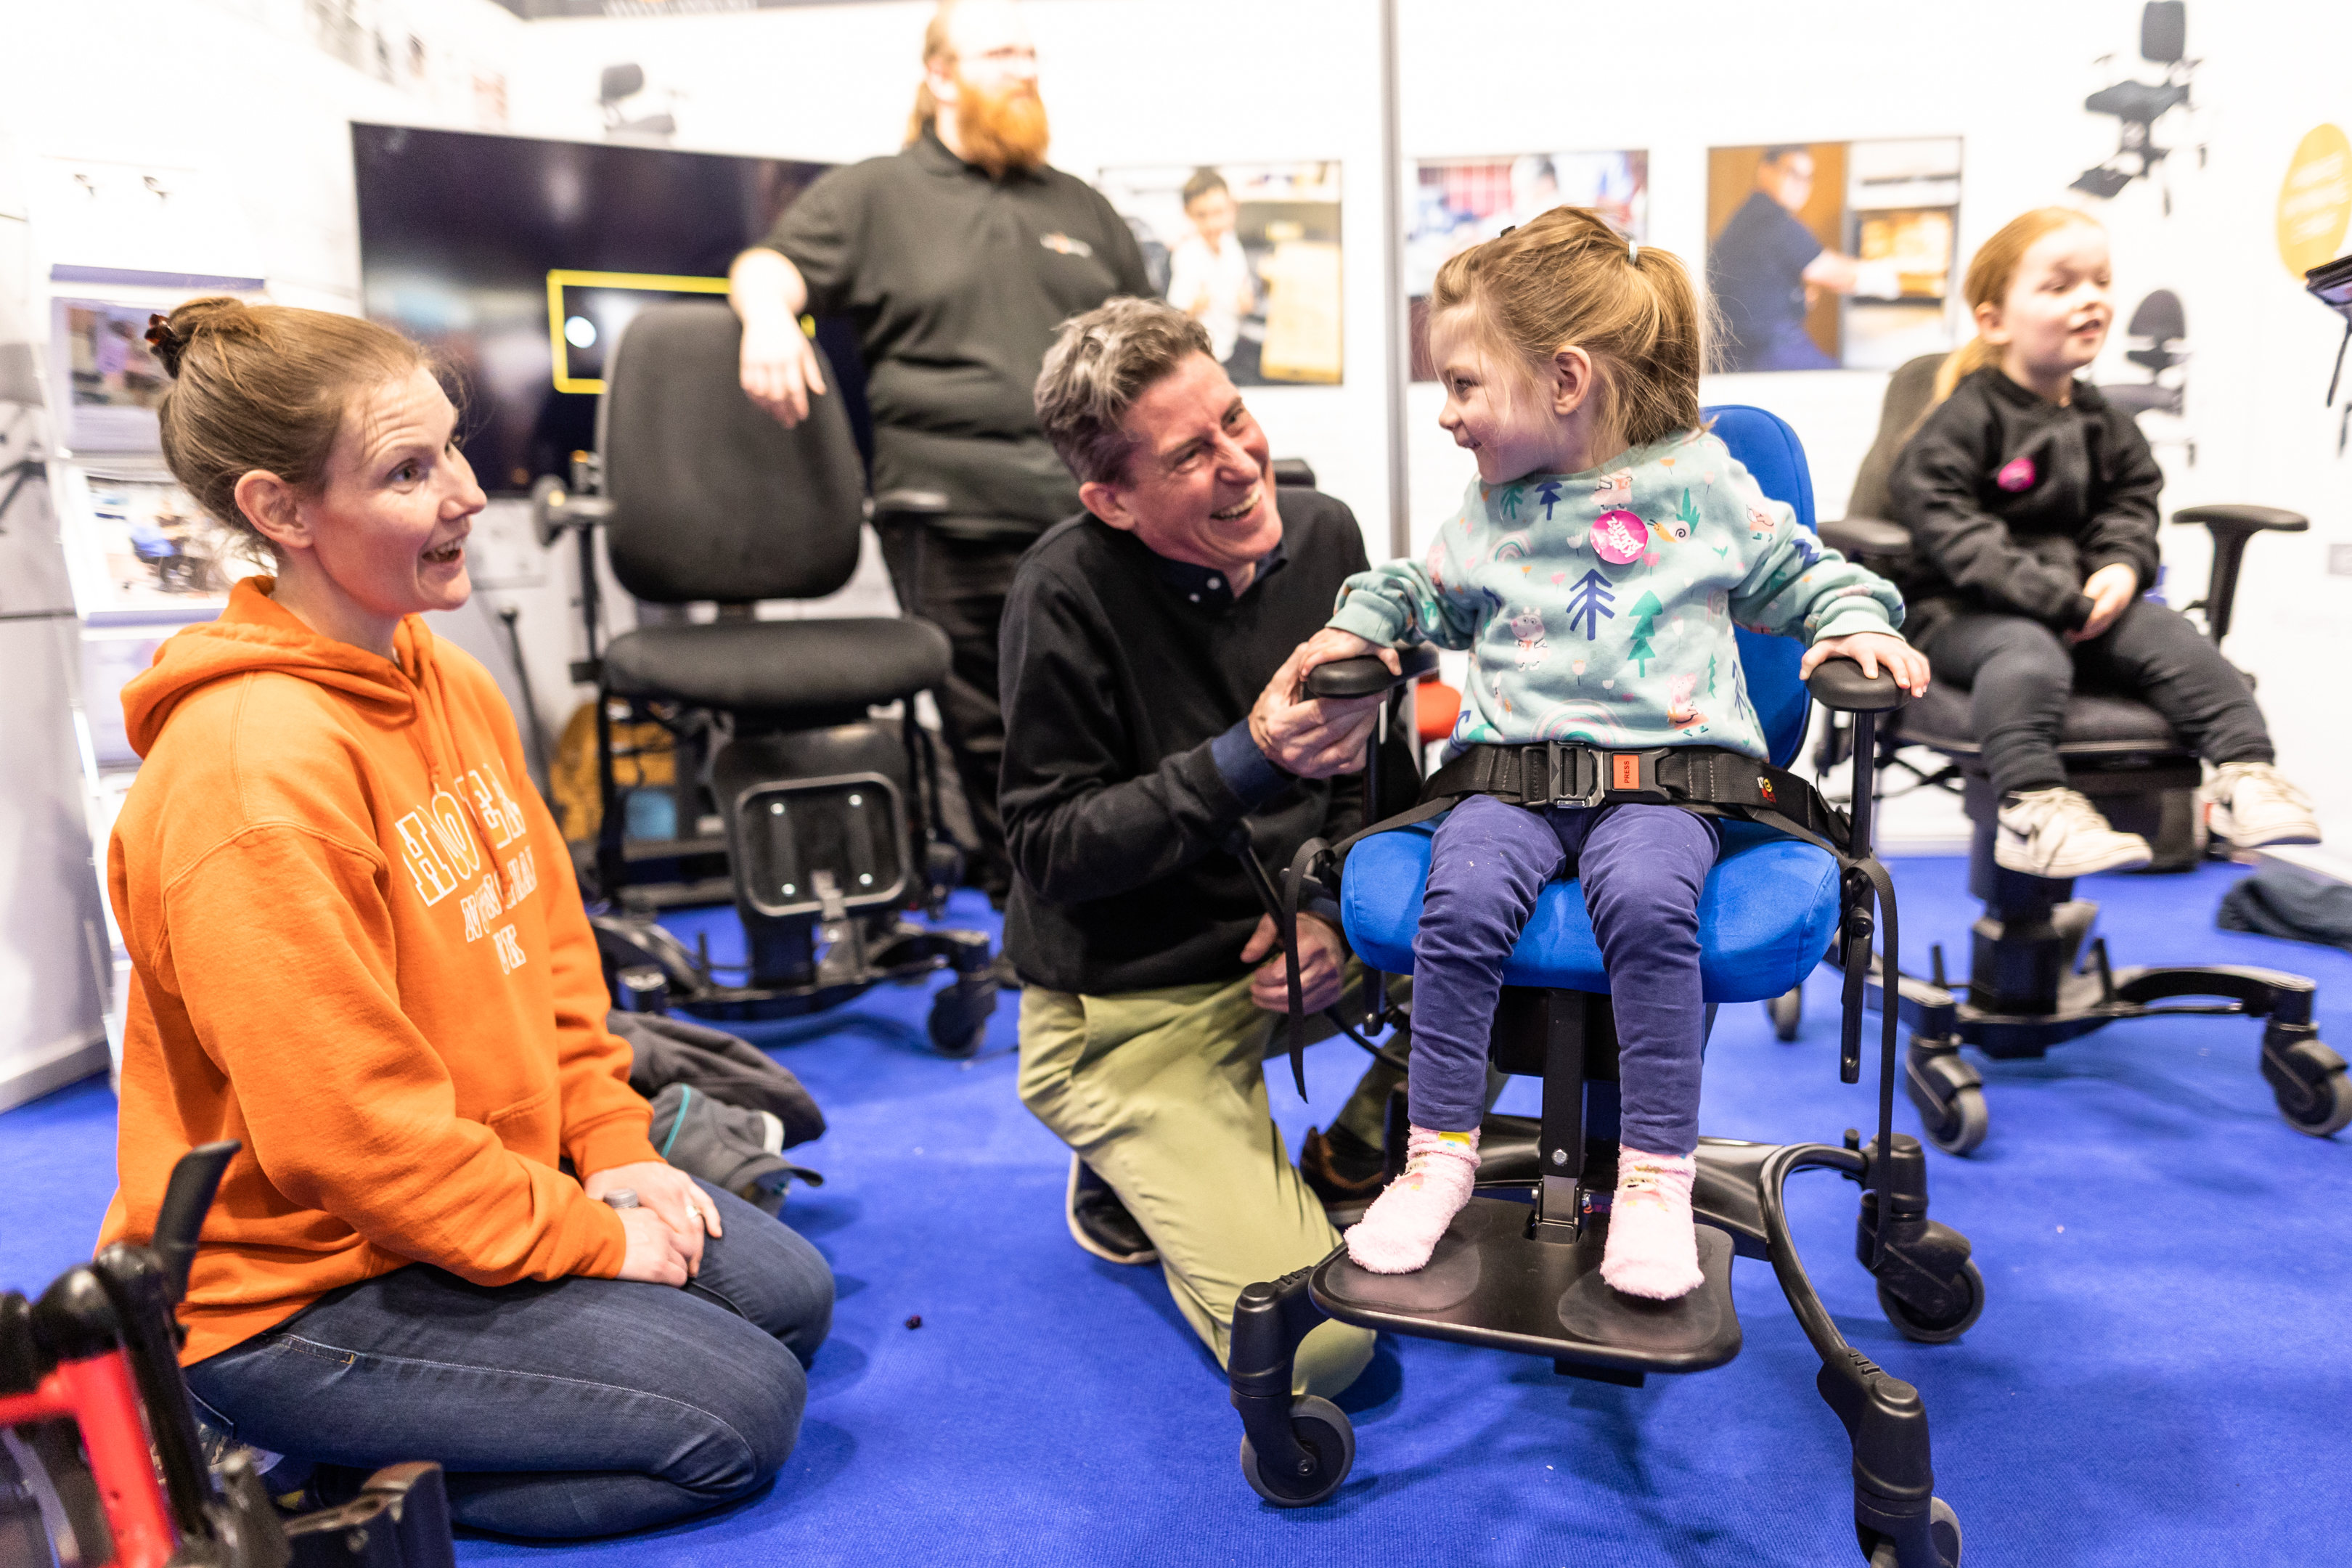 Major exhibition returns to guide people who support children with disabilities and additional needs